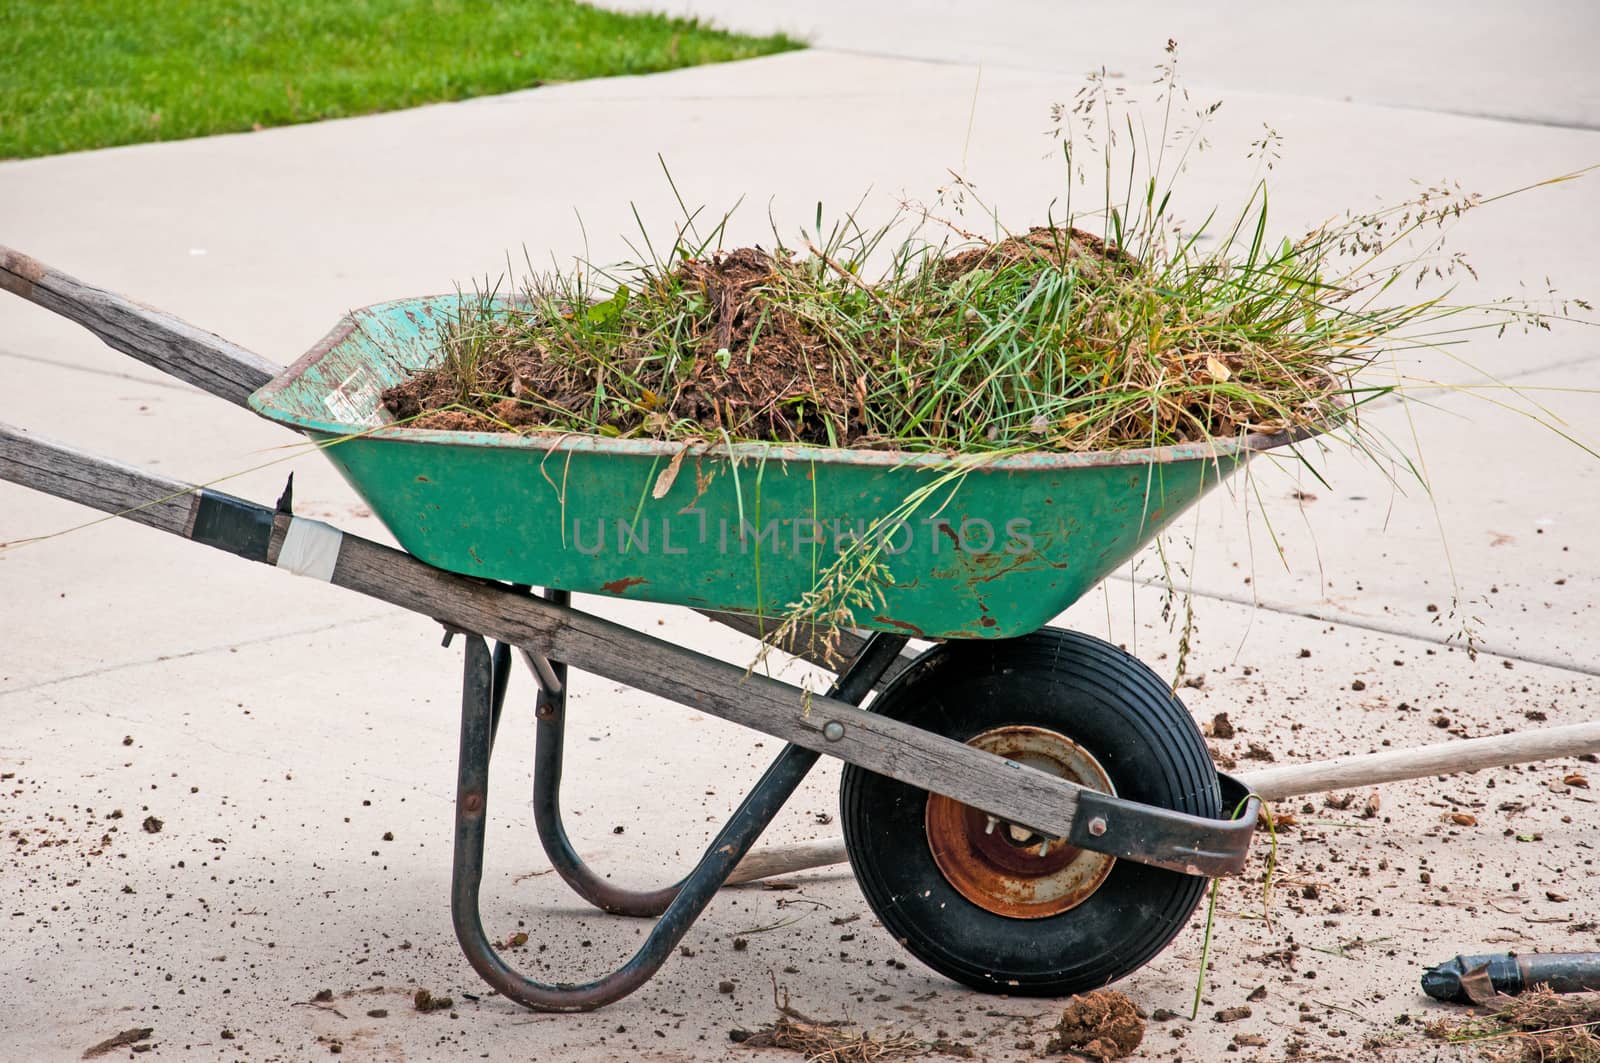 Old wheelbarrow still giving service after many years performing yardwork.